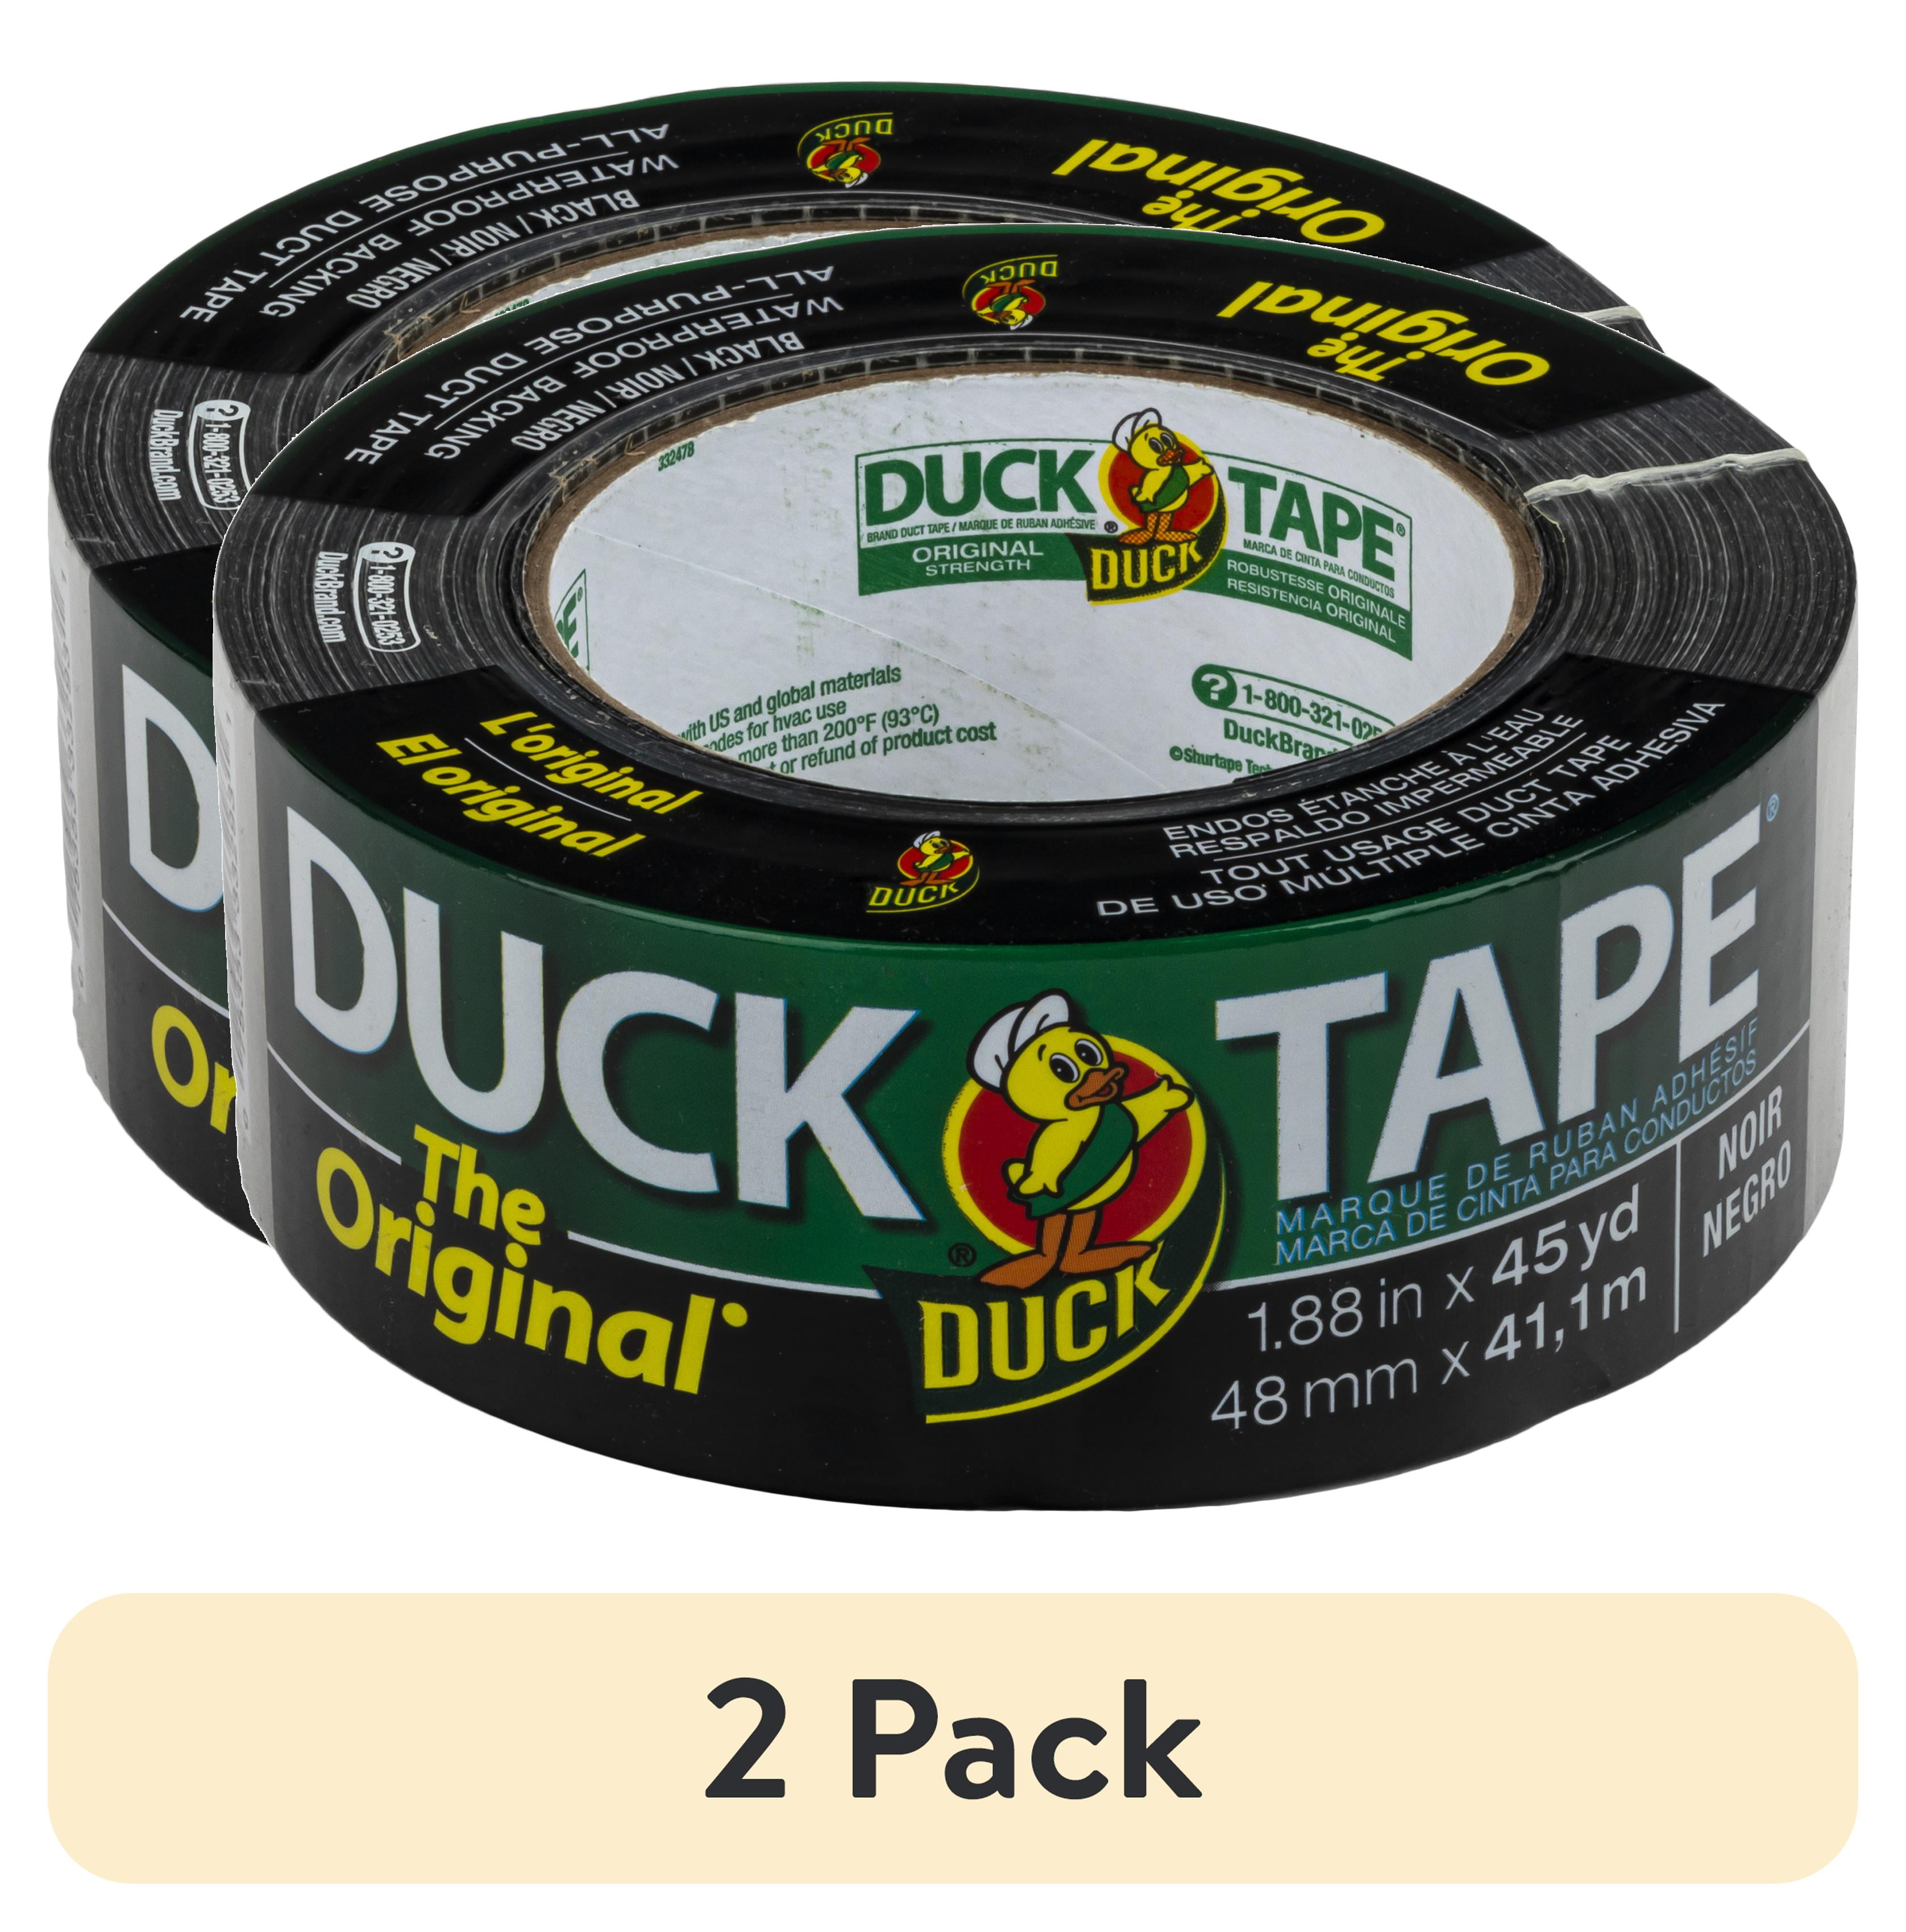 Duck Brand Duct Tape Sheets, 6 Count 